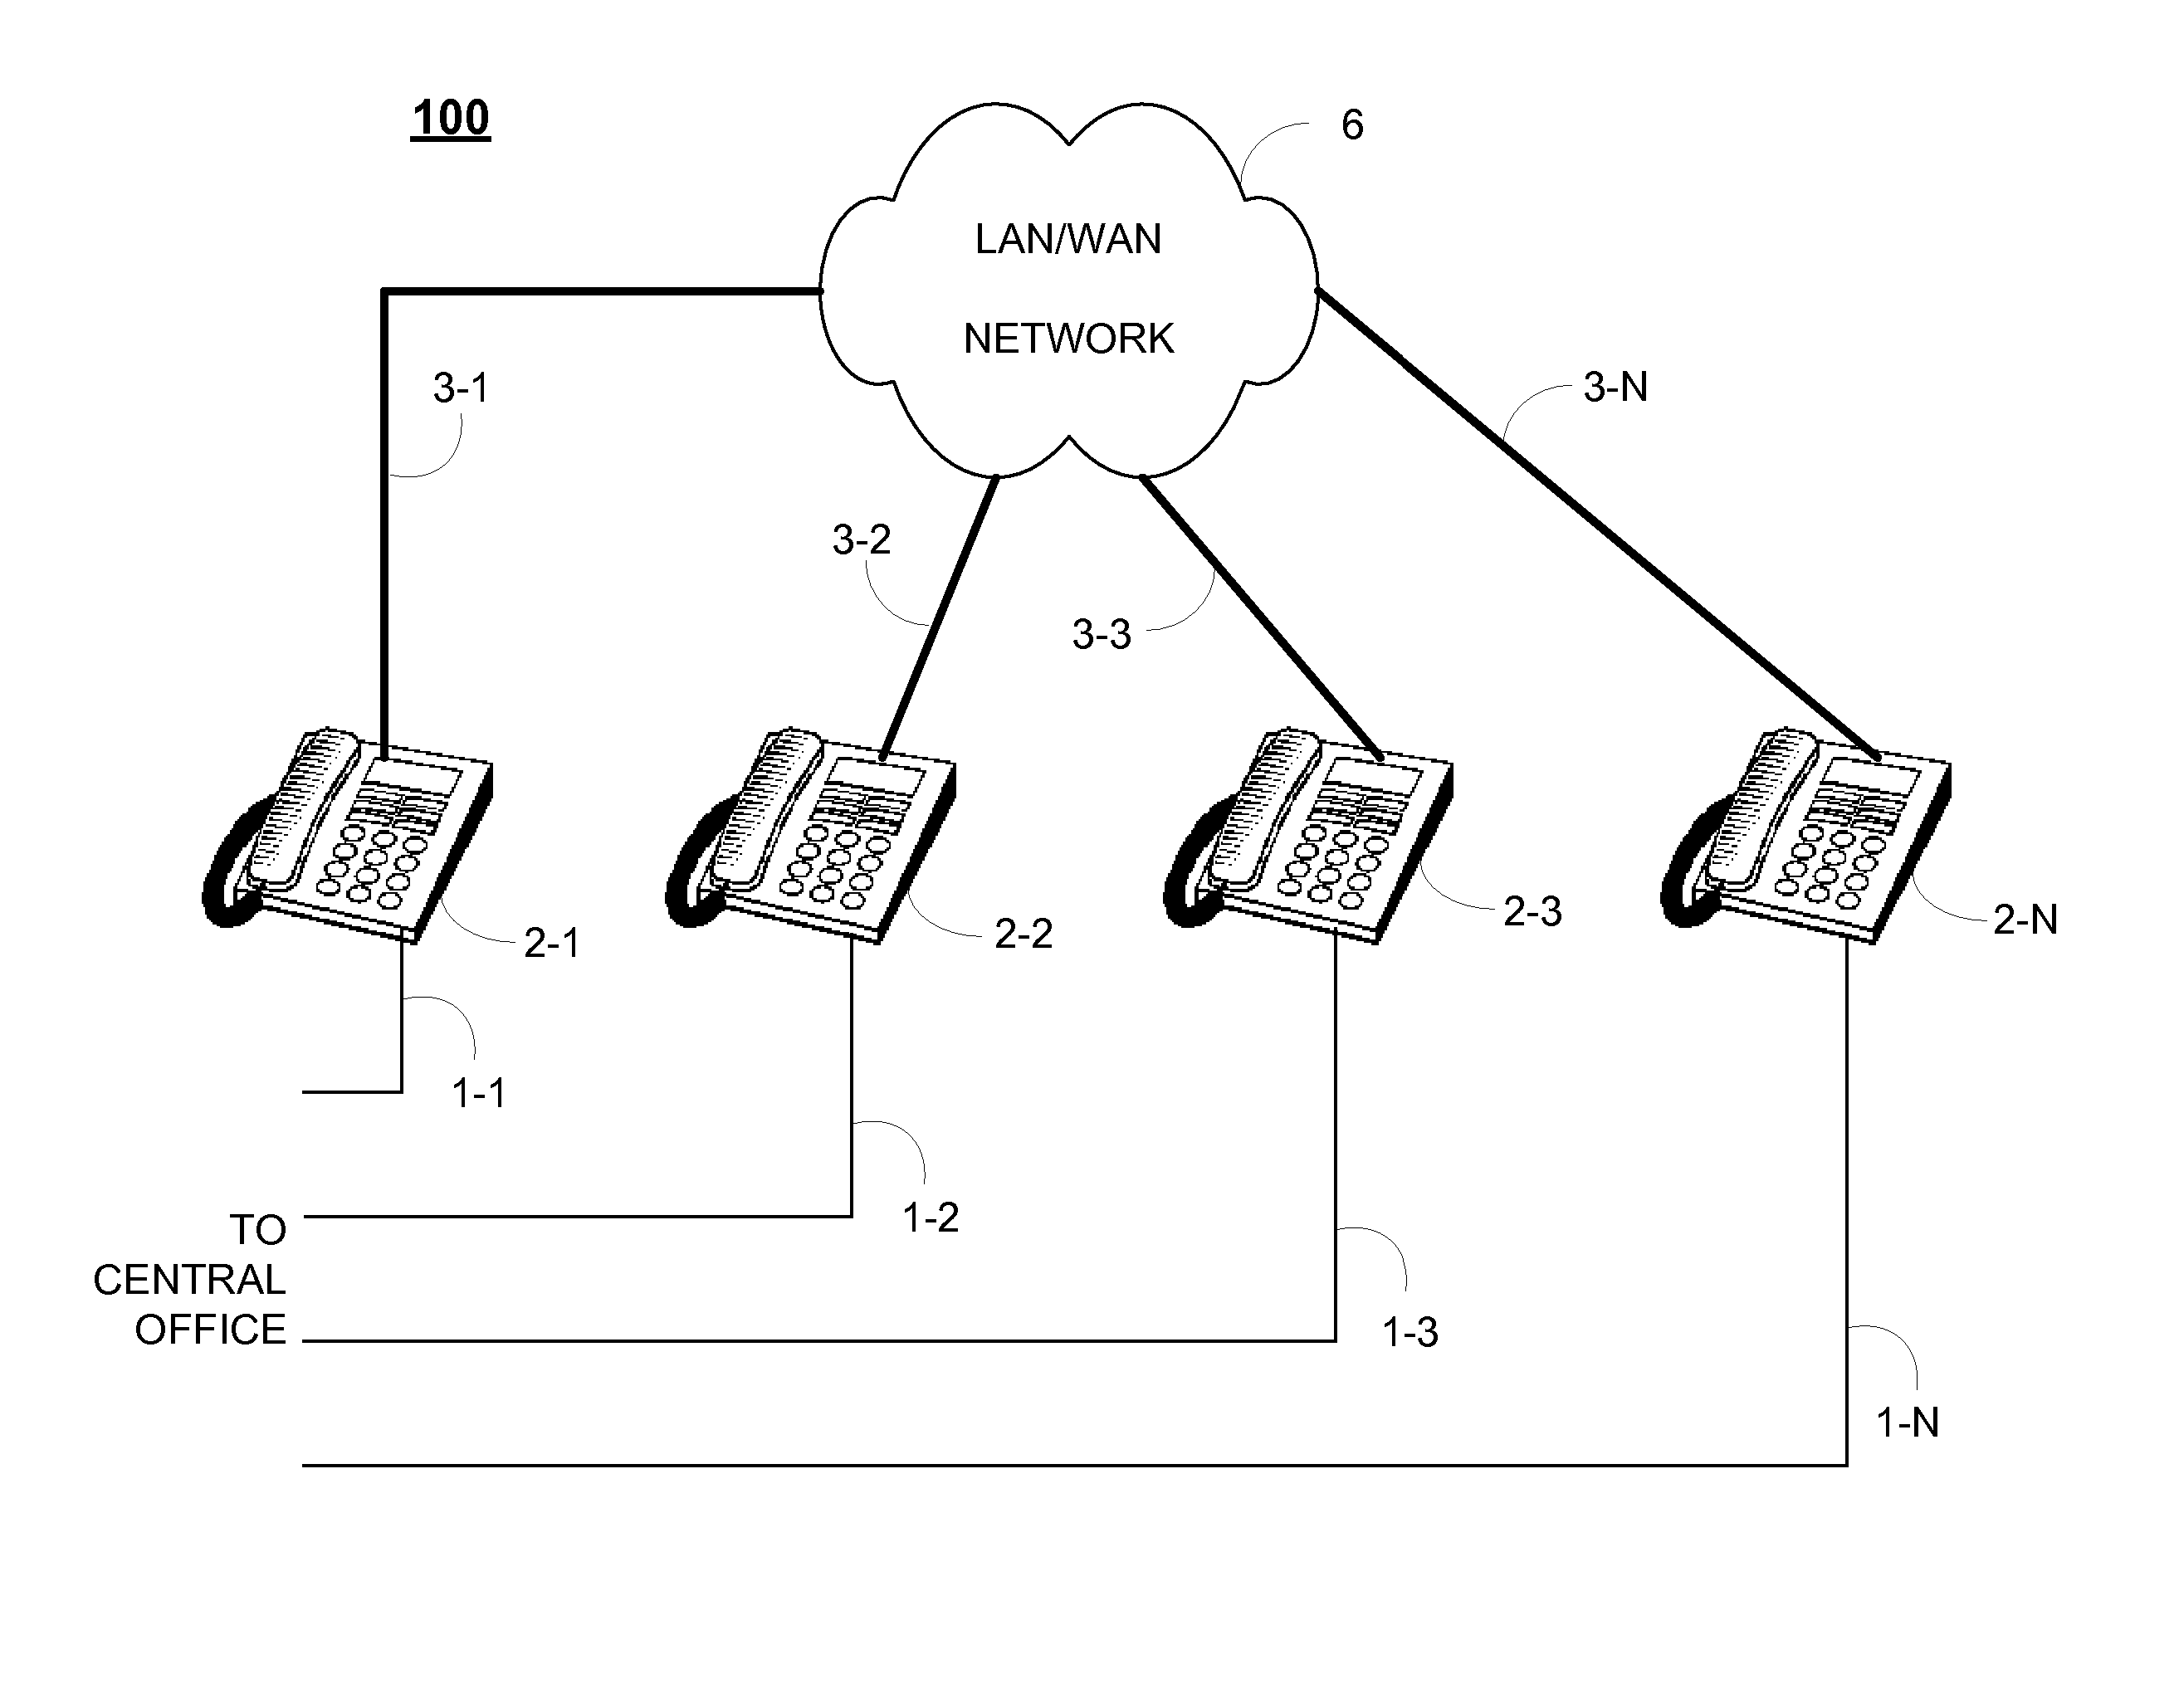 Server-less telephone system and methods of operation